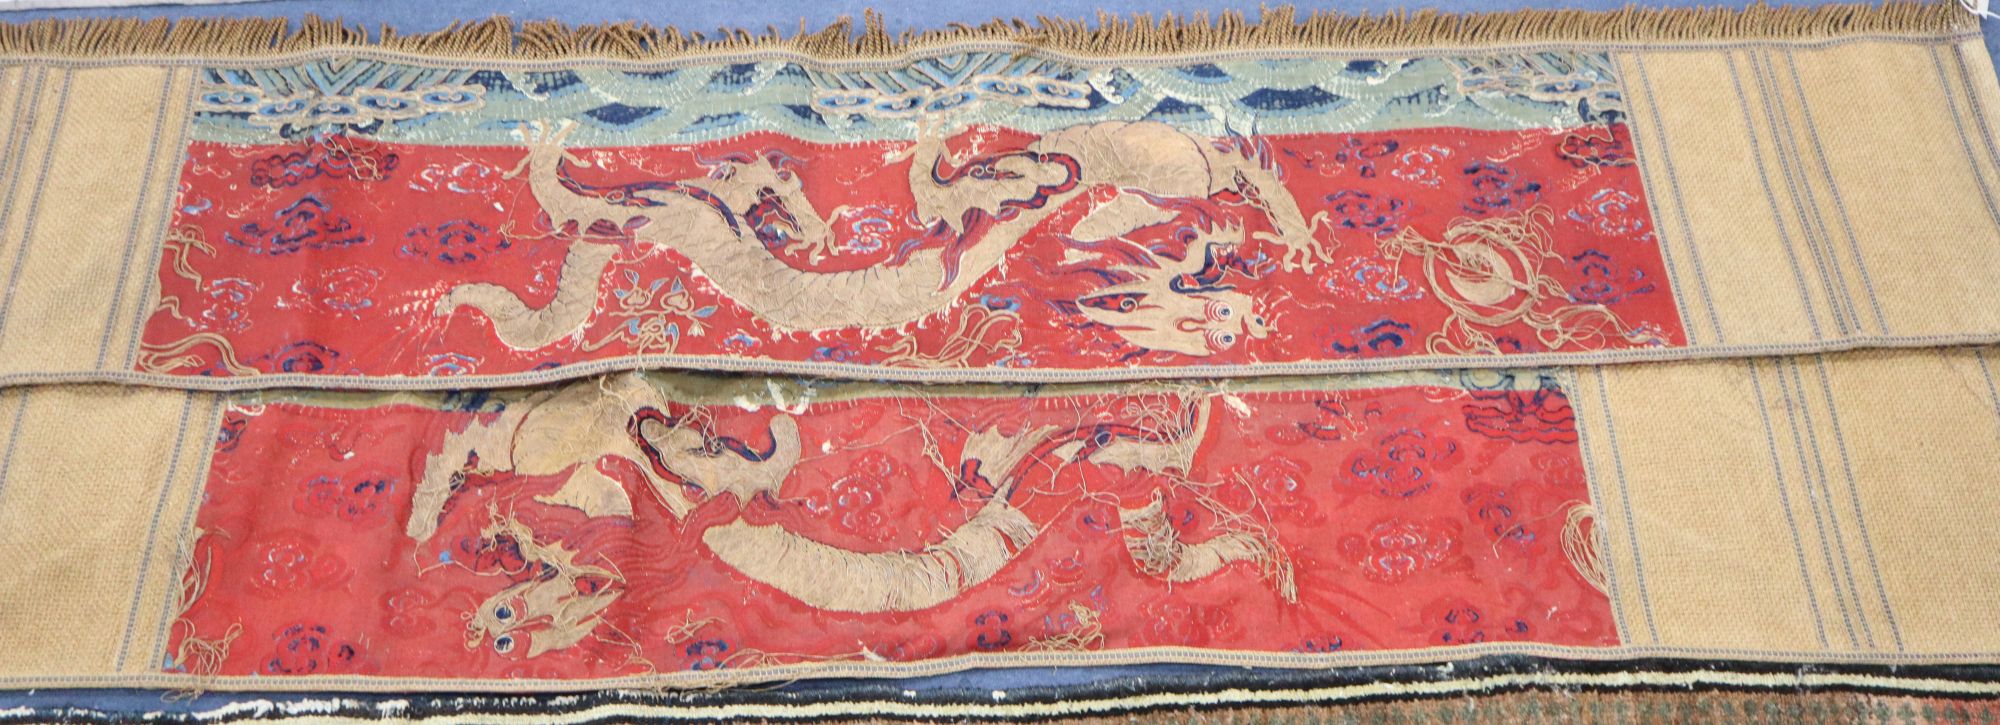 A pair of Antique Chinese silk and gold threadwork panels depicting dragons over waves, 38 x 150cm and 38 x 130cm, distressed and now